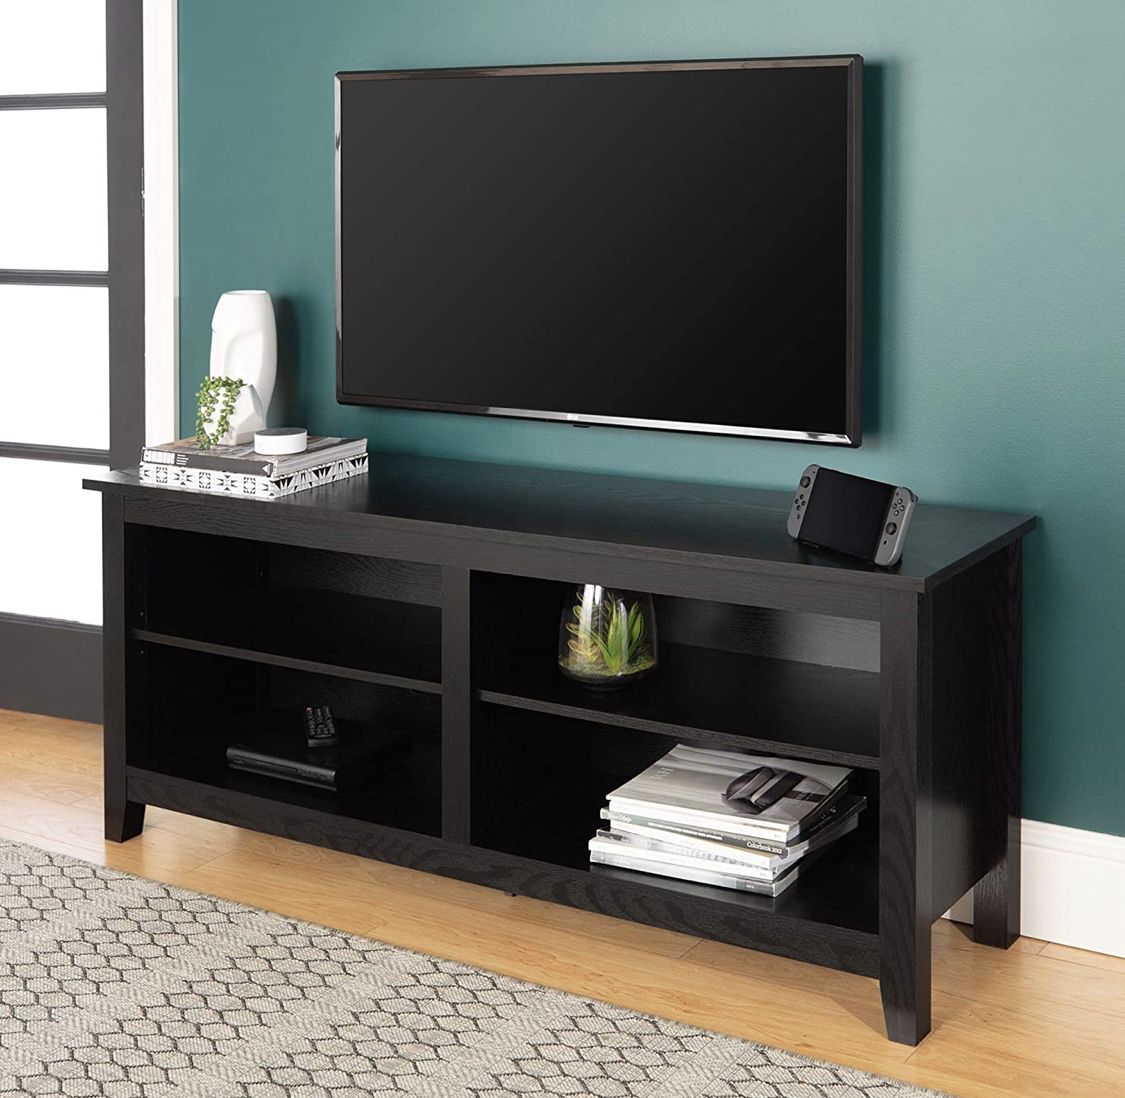 Classic 4 Cubby TV Stand for TVs up to 65 Inches, 58 Inch, Black